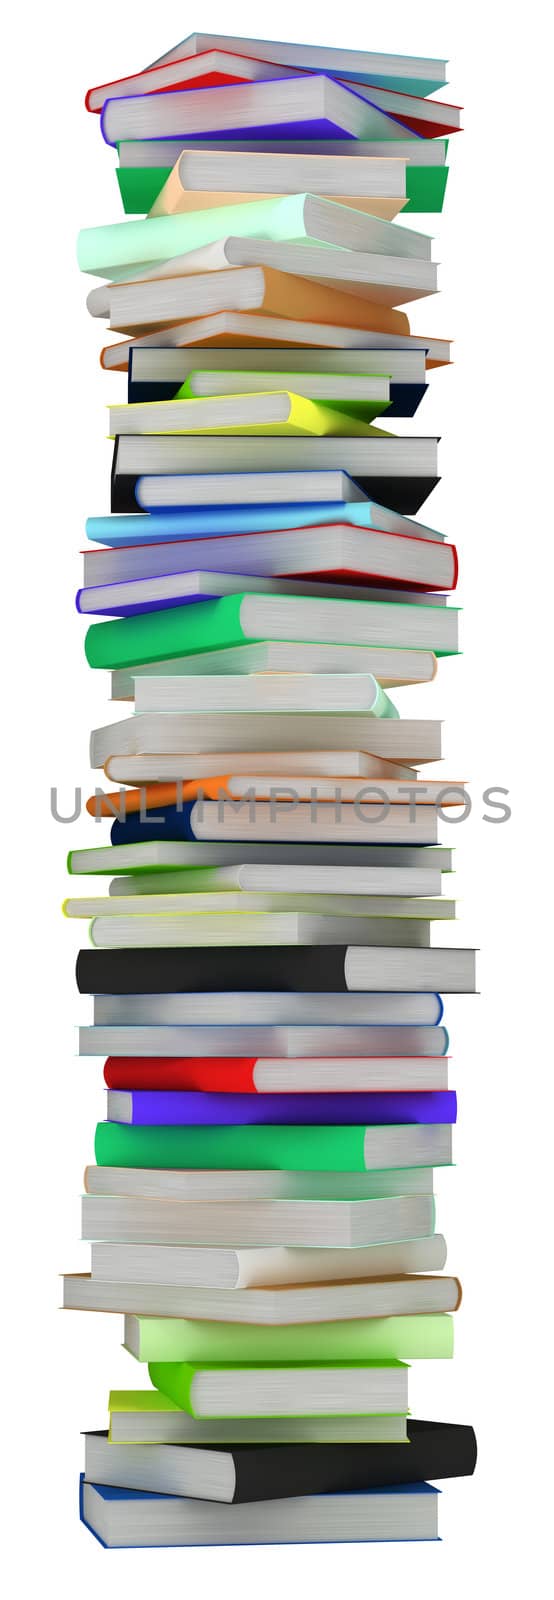 Education and knowledge. Tall heap of hardcovered books by Arsgera